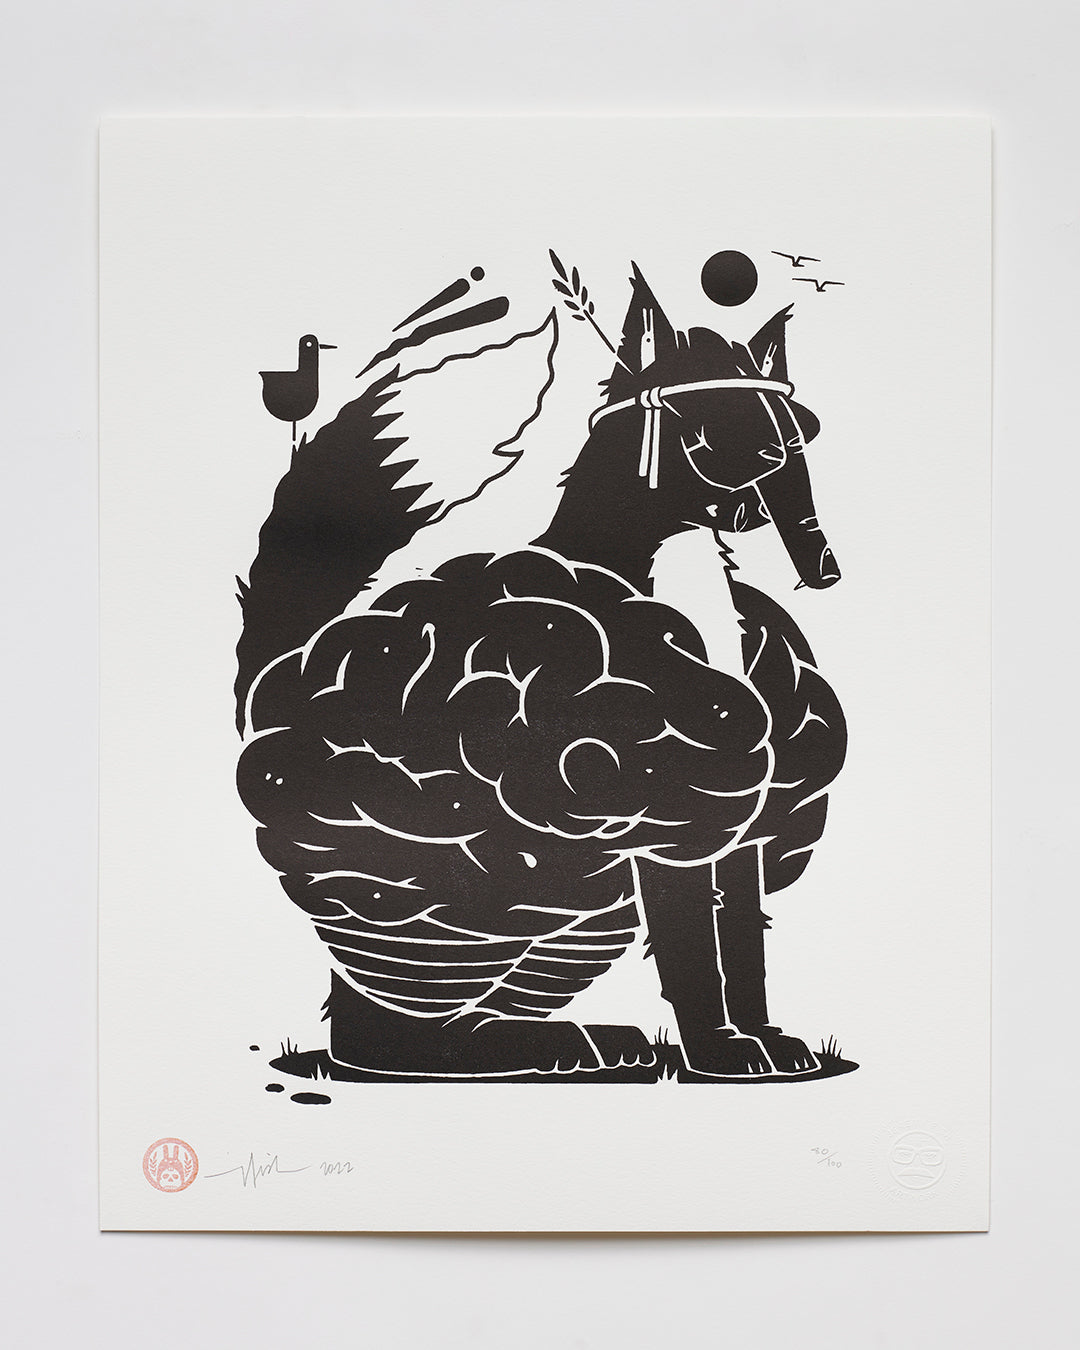  by Jeremy Fish titled Jeremy Fish - "Crafting Foxy Thoughts" Print